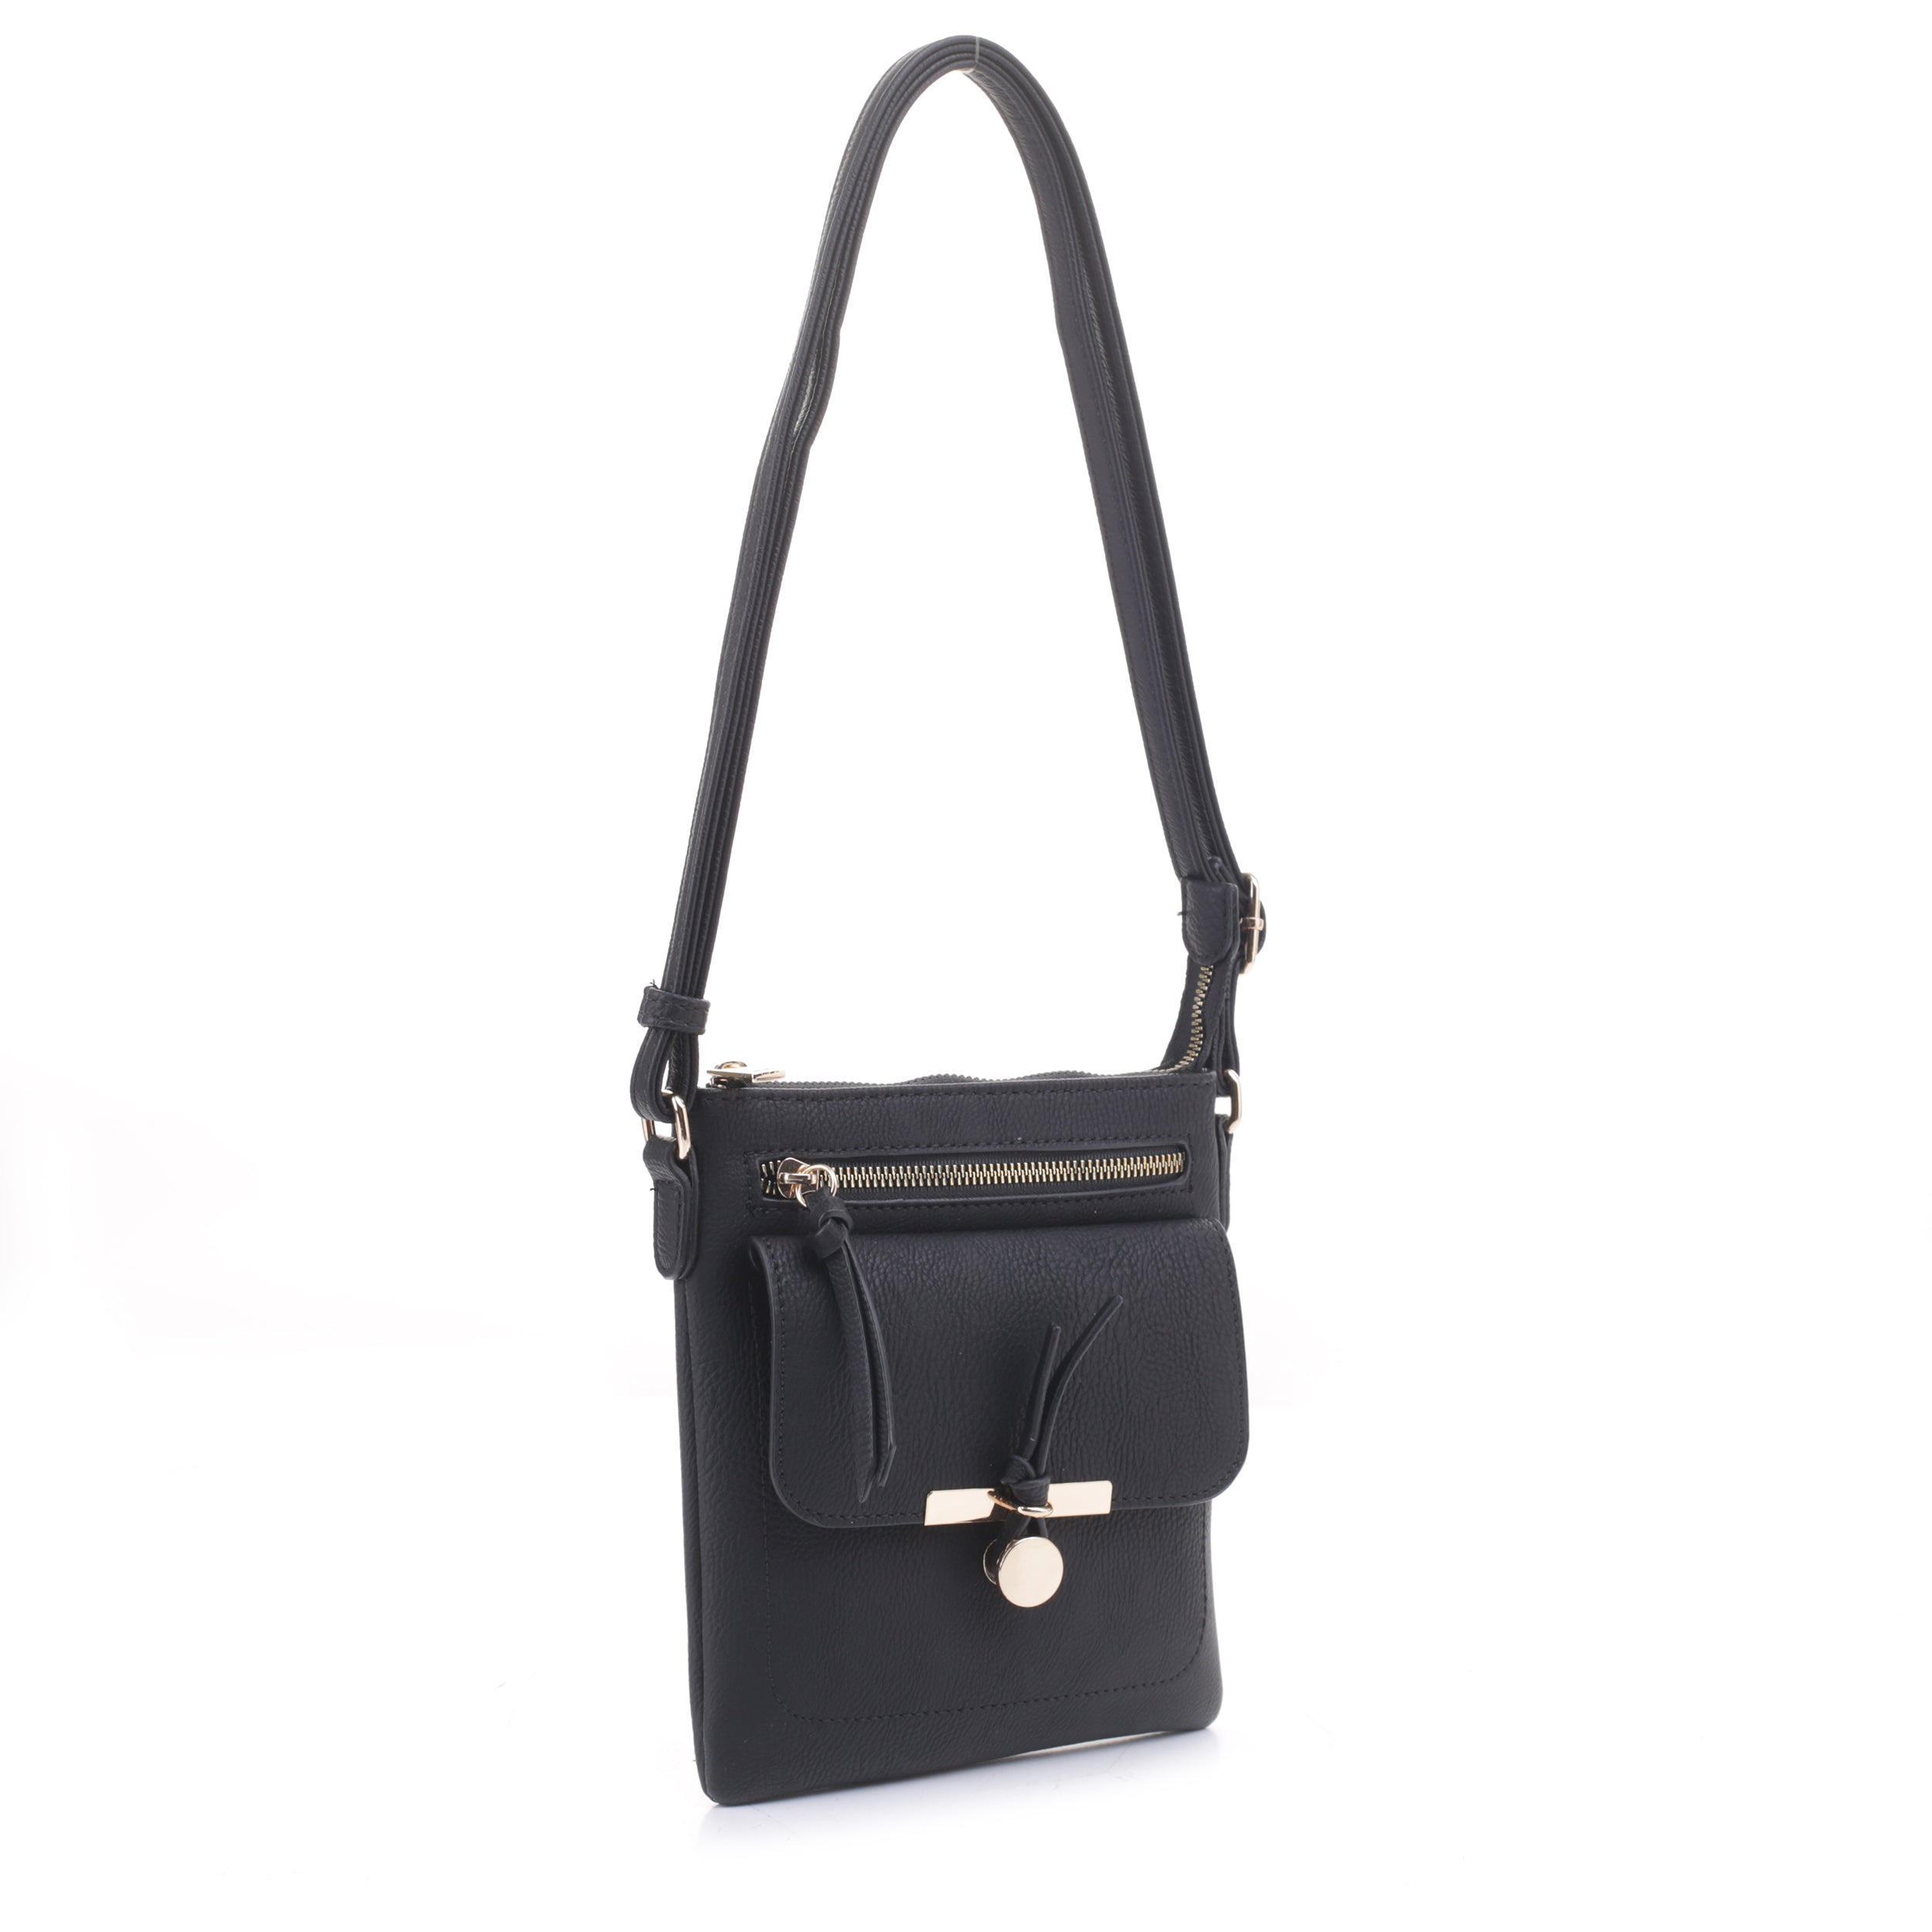 CROSSBODY WITH FLAP TOP AND ZIPPER